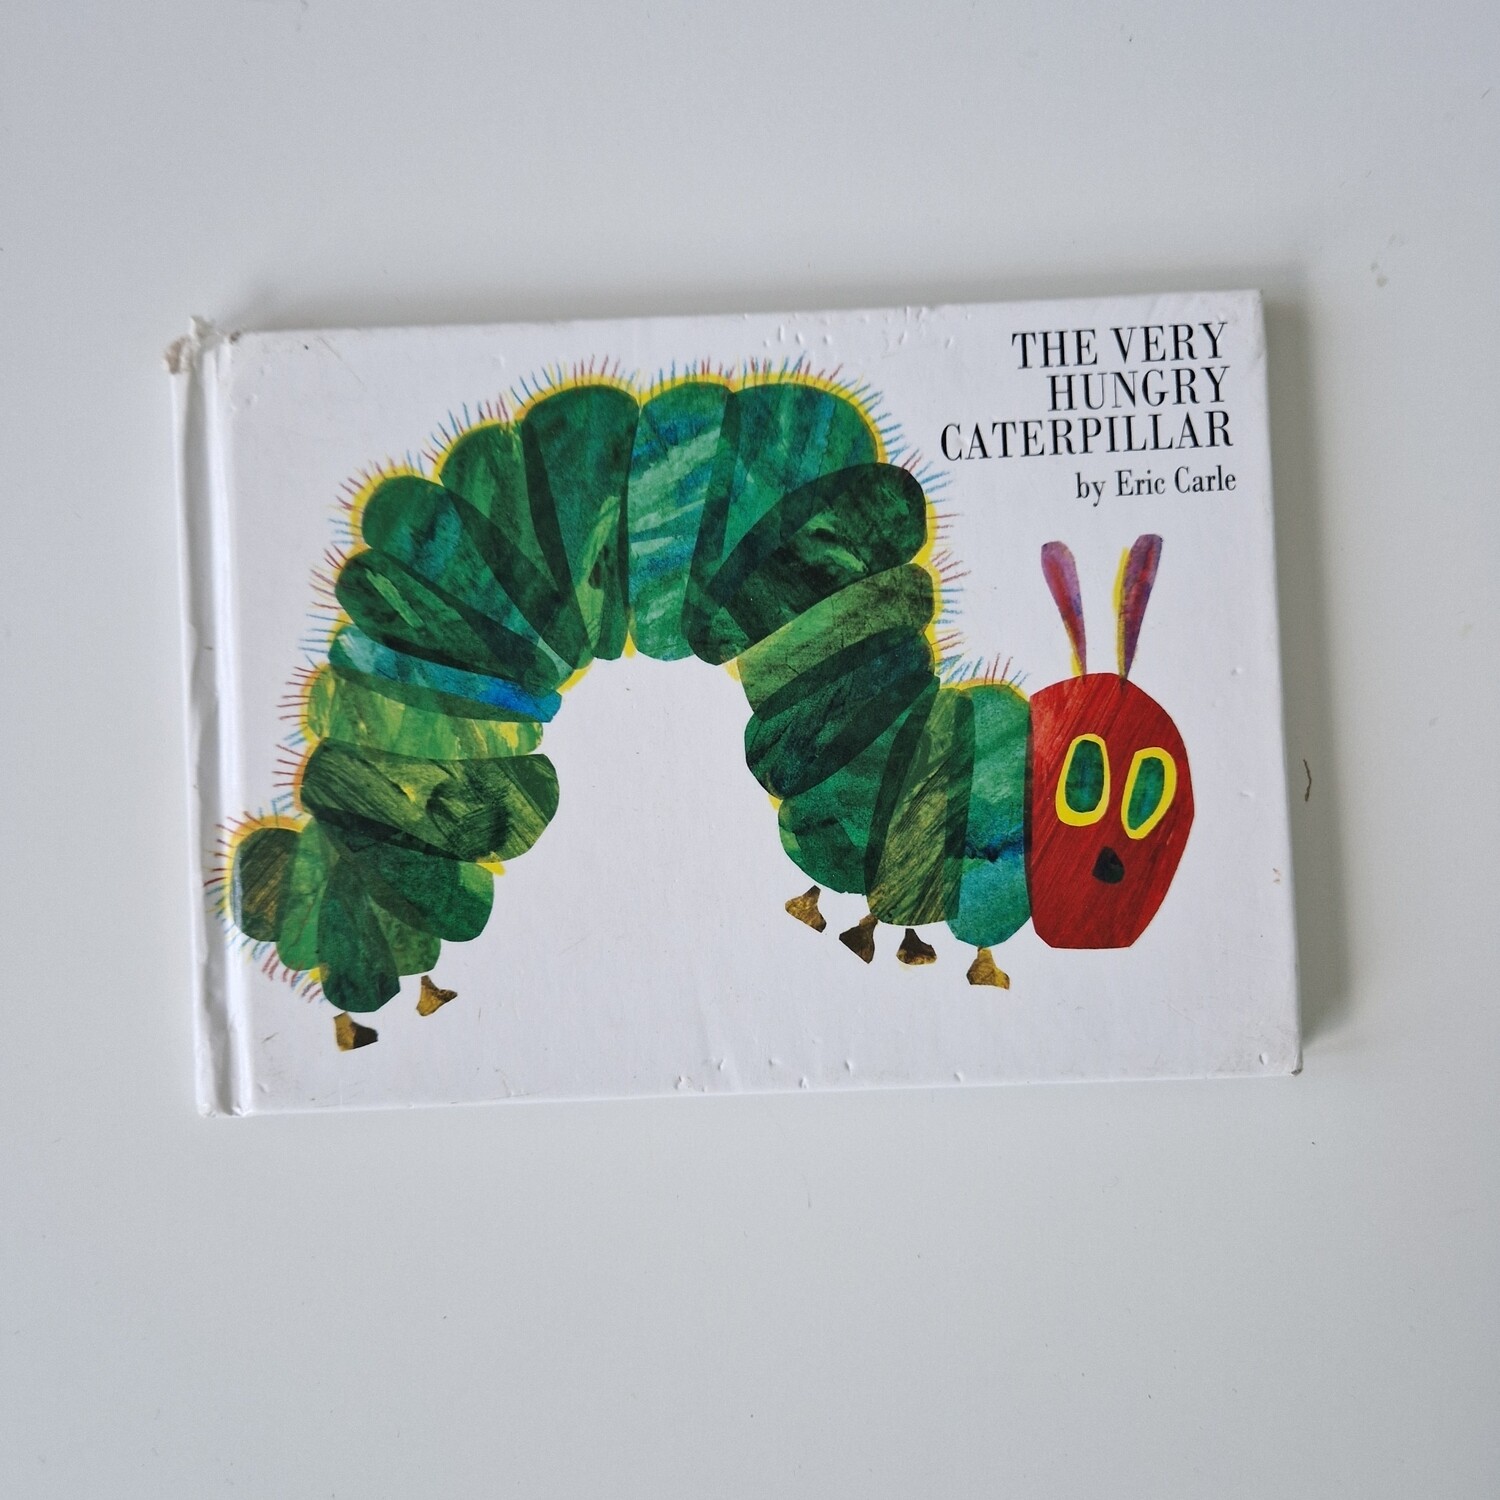 The Very Hungry Caterpillar Notebook - comes with metal book corners